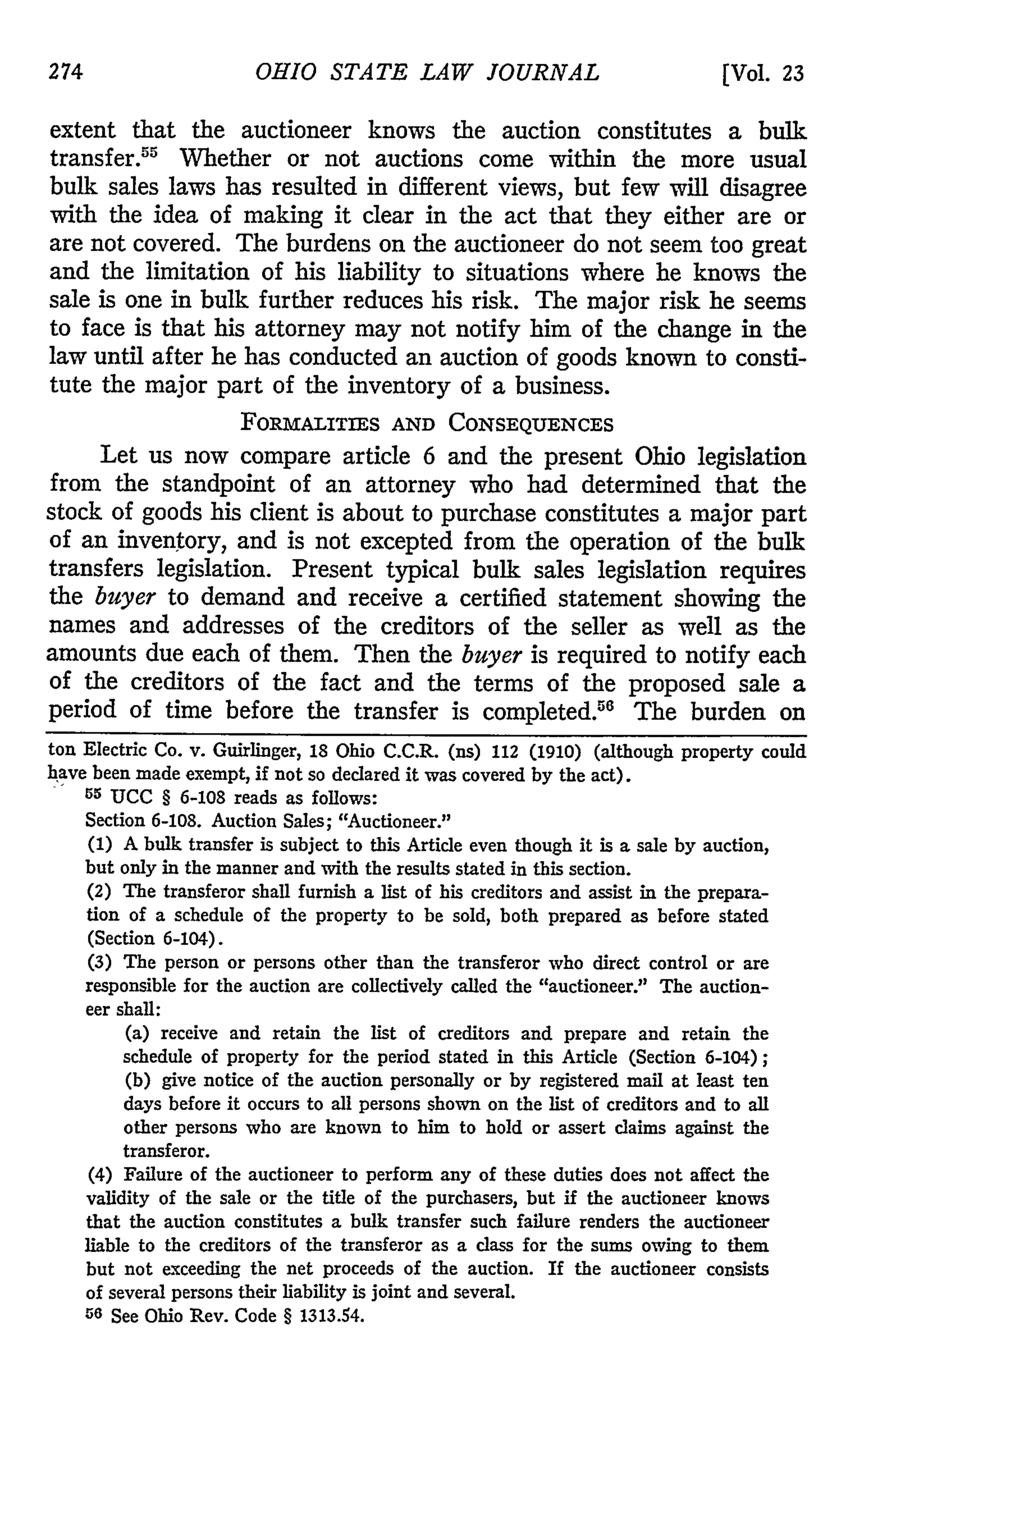 OHIO STATE LAW JOURNAL [Vol. 23 extent that the auctioneer knows the auction constitutes a bulk transfer.